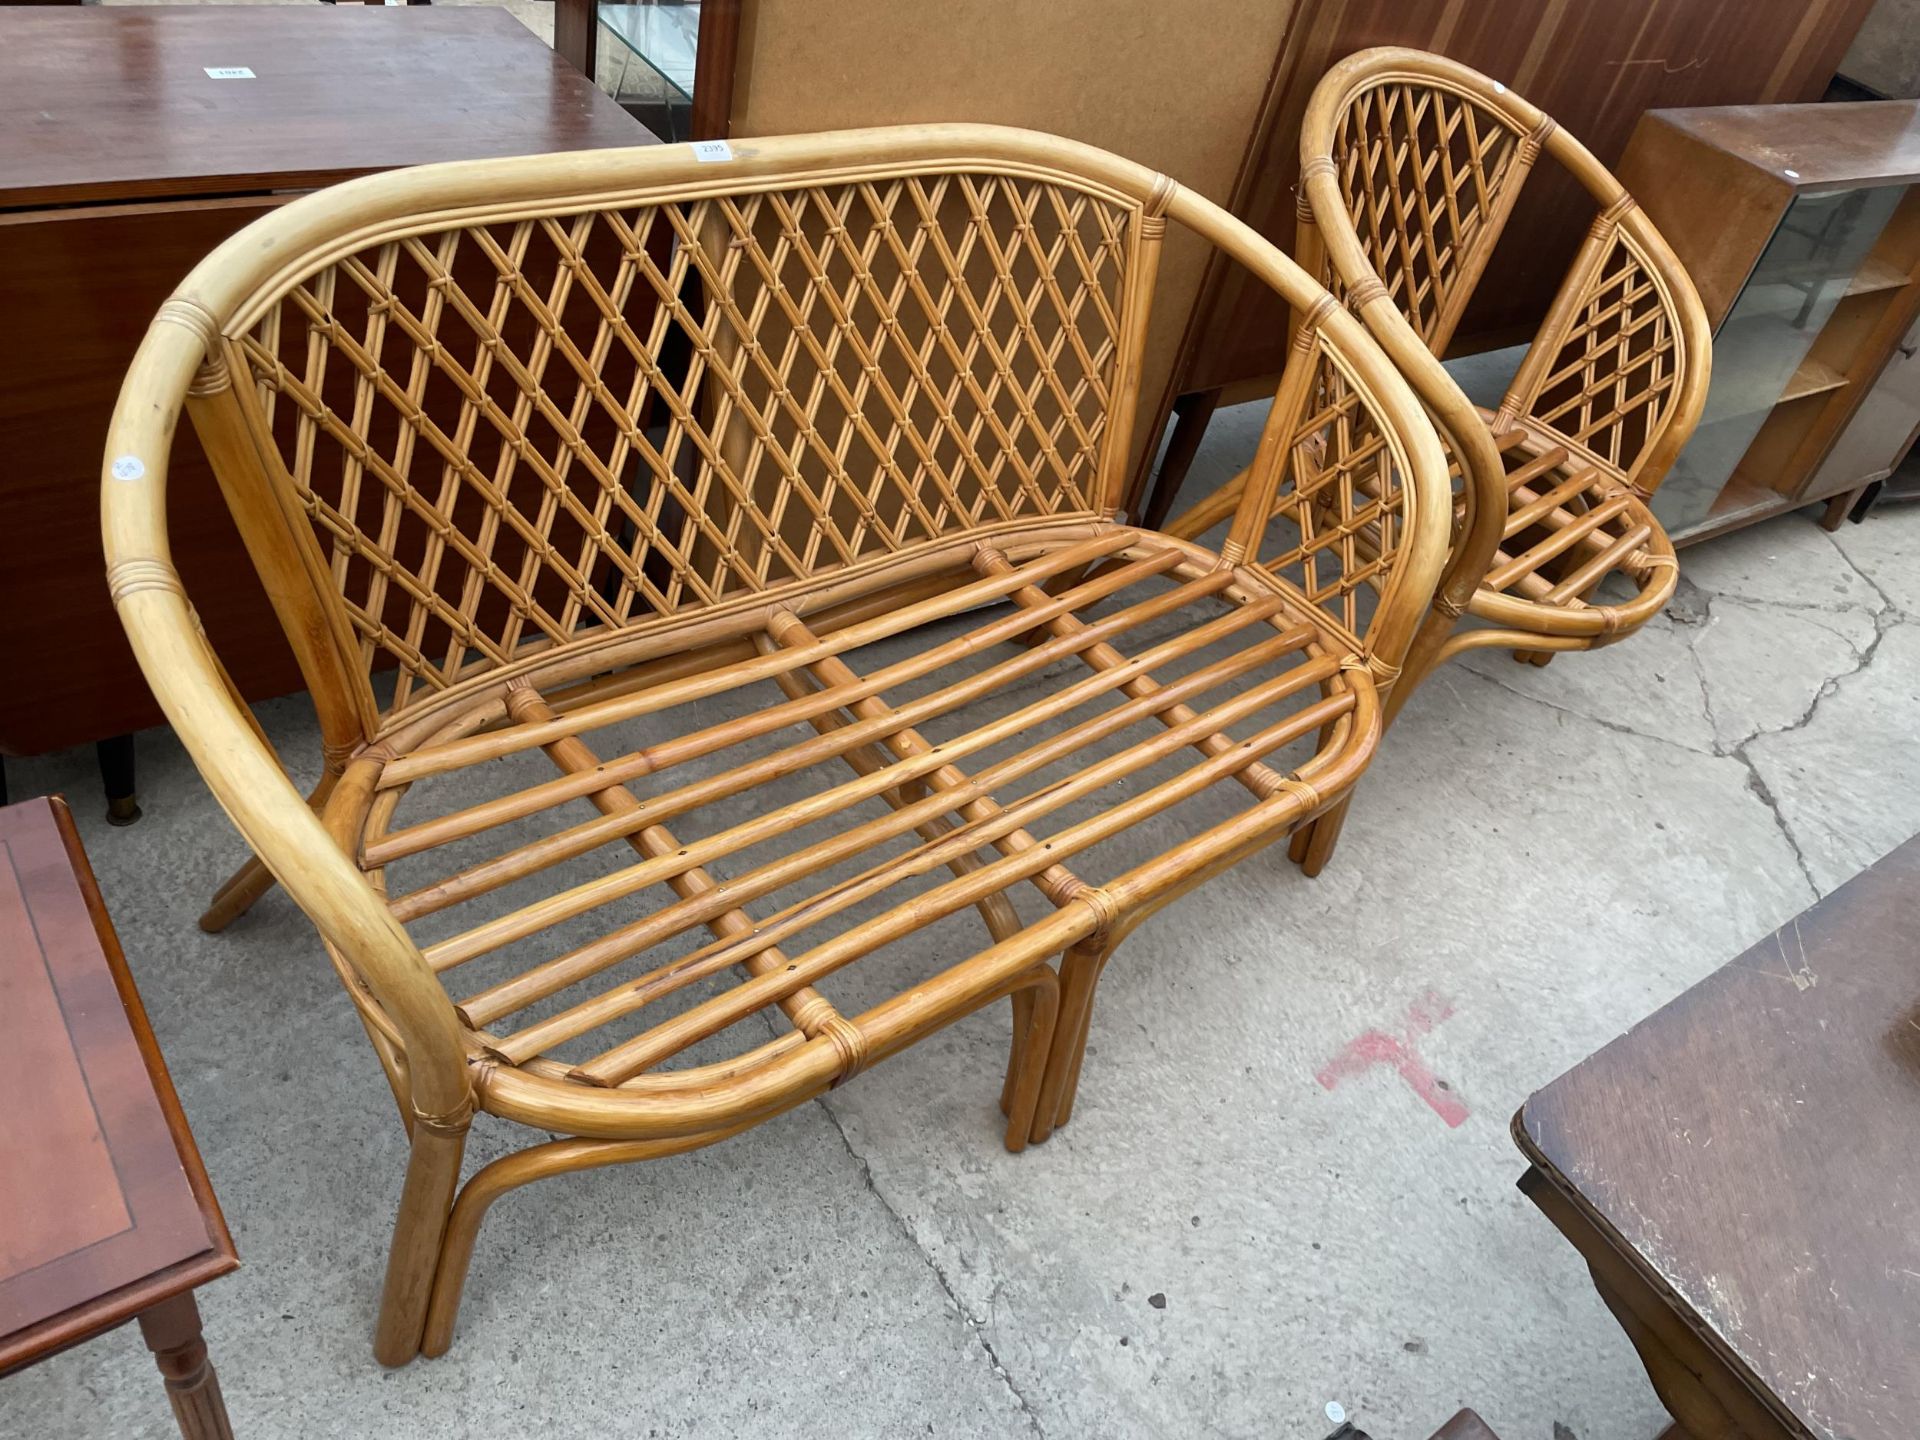 A WICKER AND BAMBOO SETTLE AND CHAIR, LACKING CUSHIONS